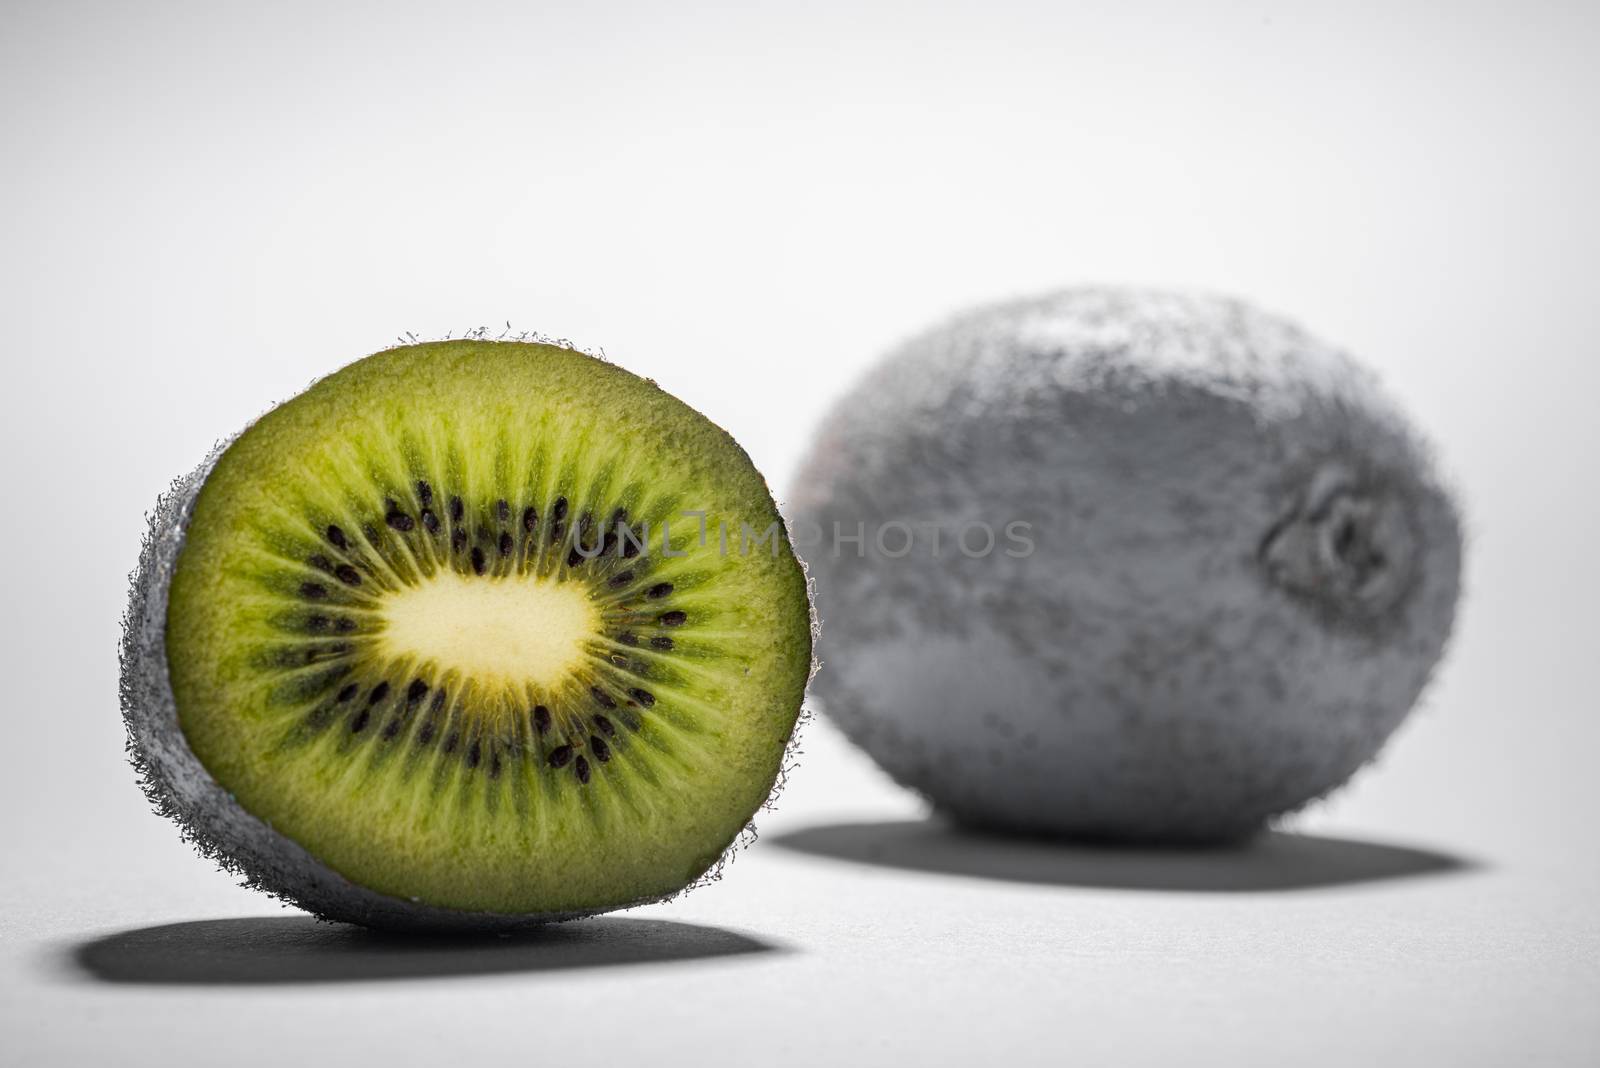 Modern Food Design. Monochrome Painted Kiwi Fruit Whole and Cut. Abstract Food Background.